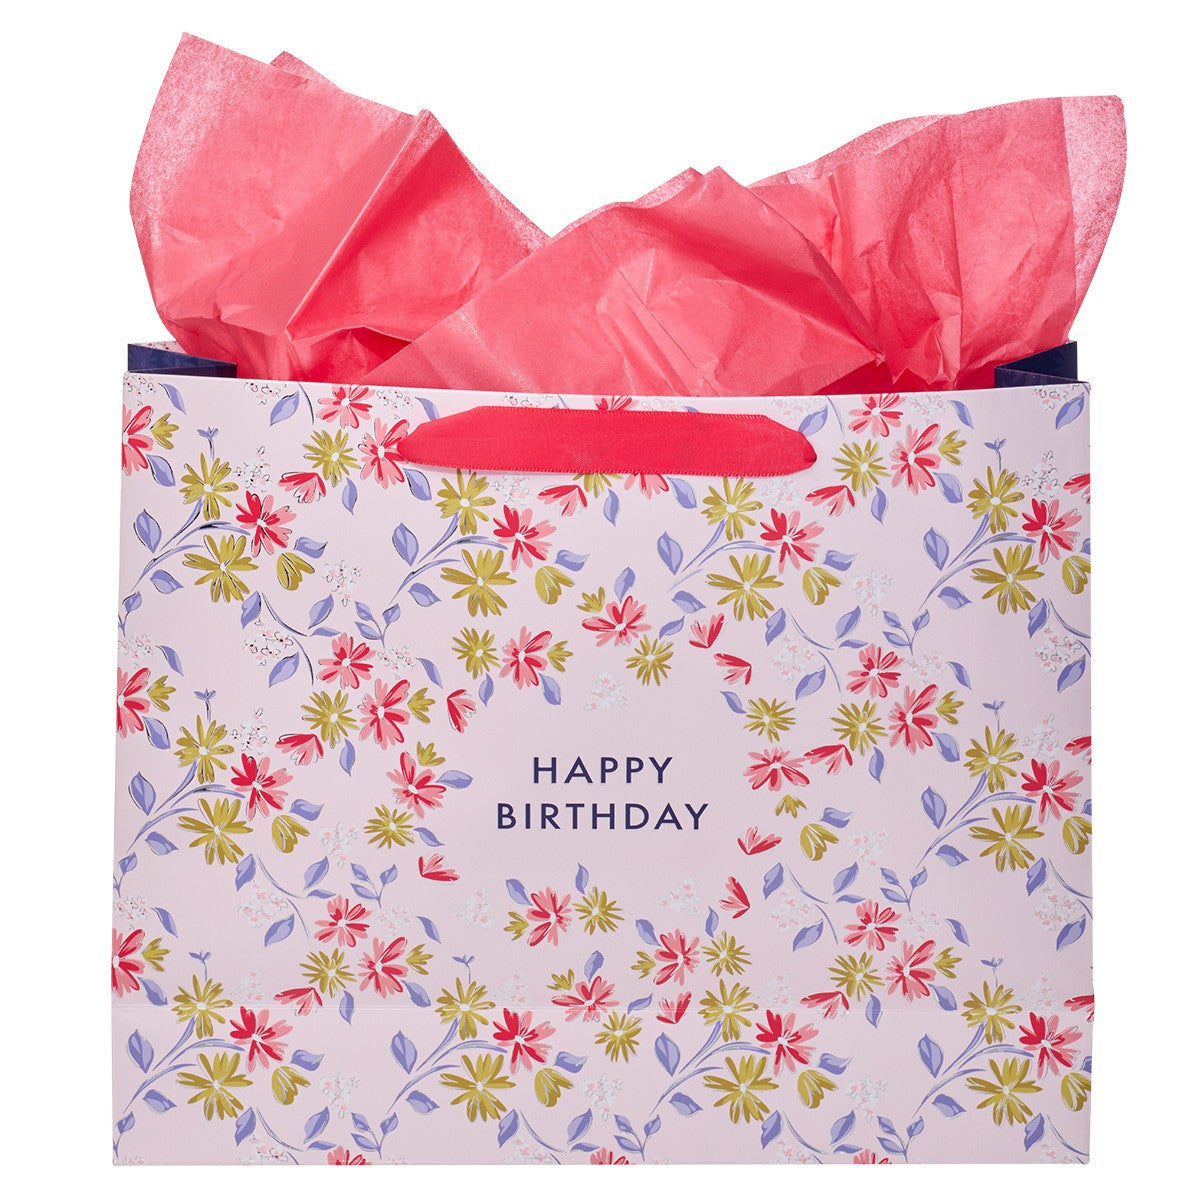 Happy Birthday Pink Flower Trellis Large Landscape Gift Bag Set with Card - The Christian Gift Company